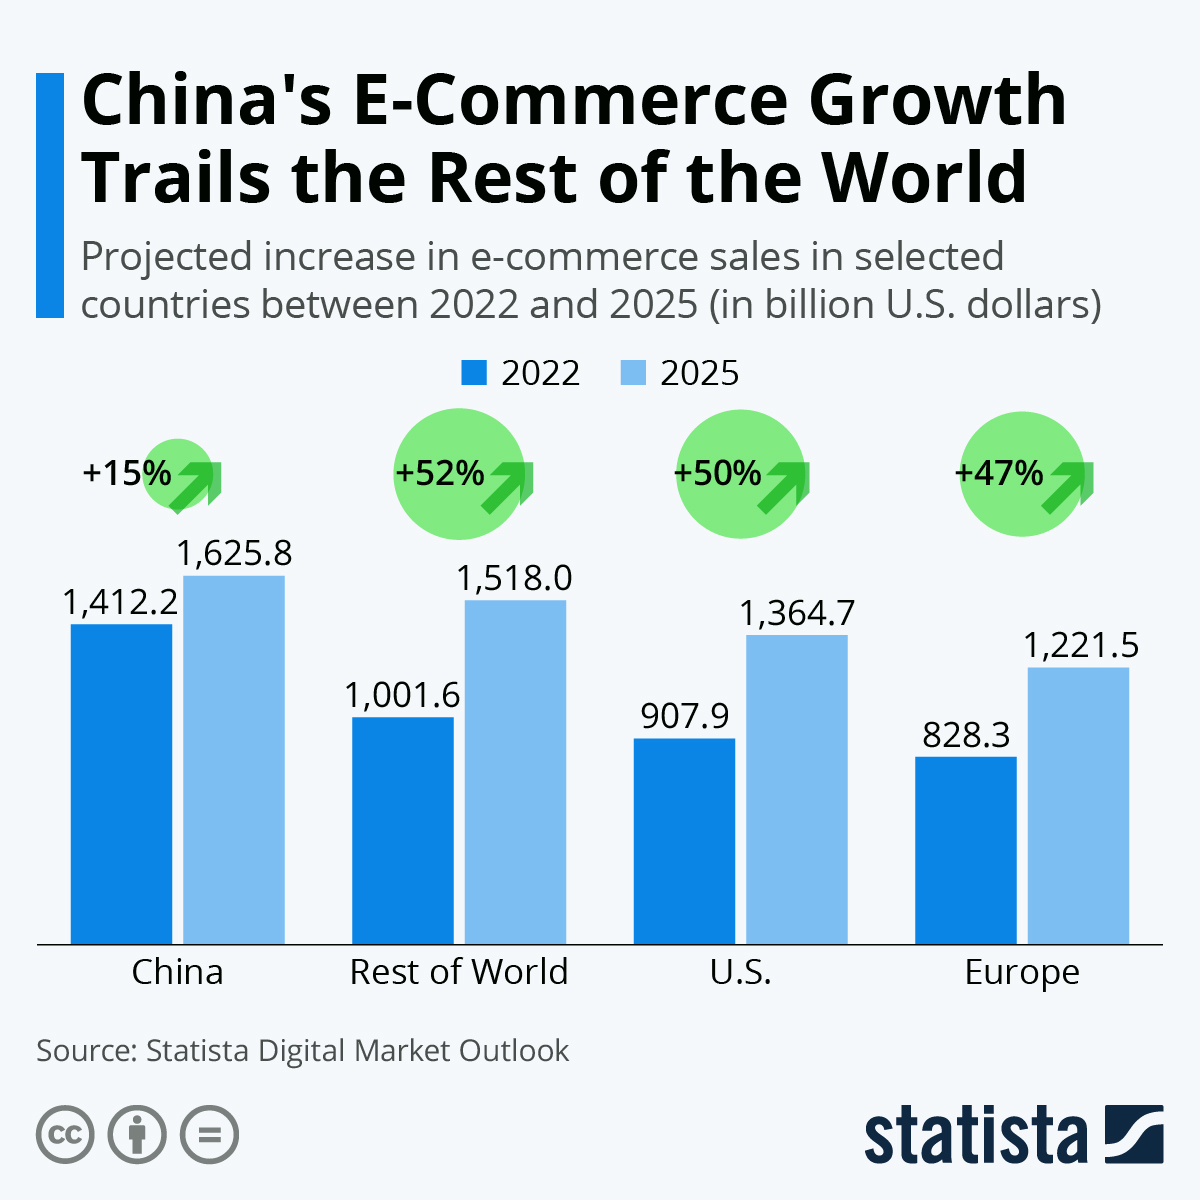 China's E-Commerce Growth Trails the Rest of the World